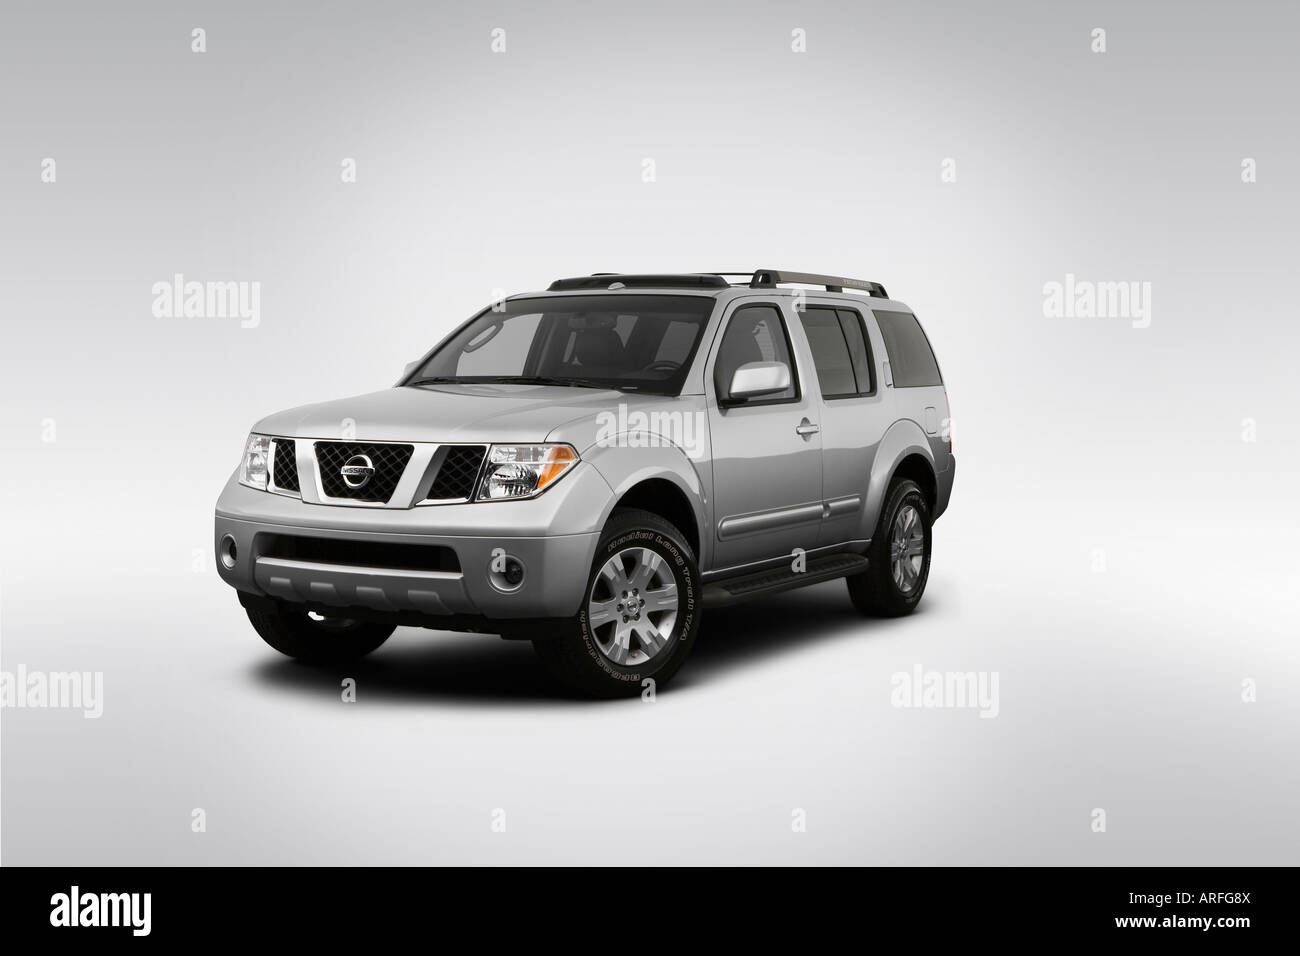 2007 Nissan Pathfinder LE in Silver - Front angle view Stock Photo